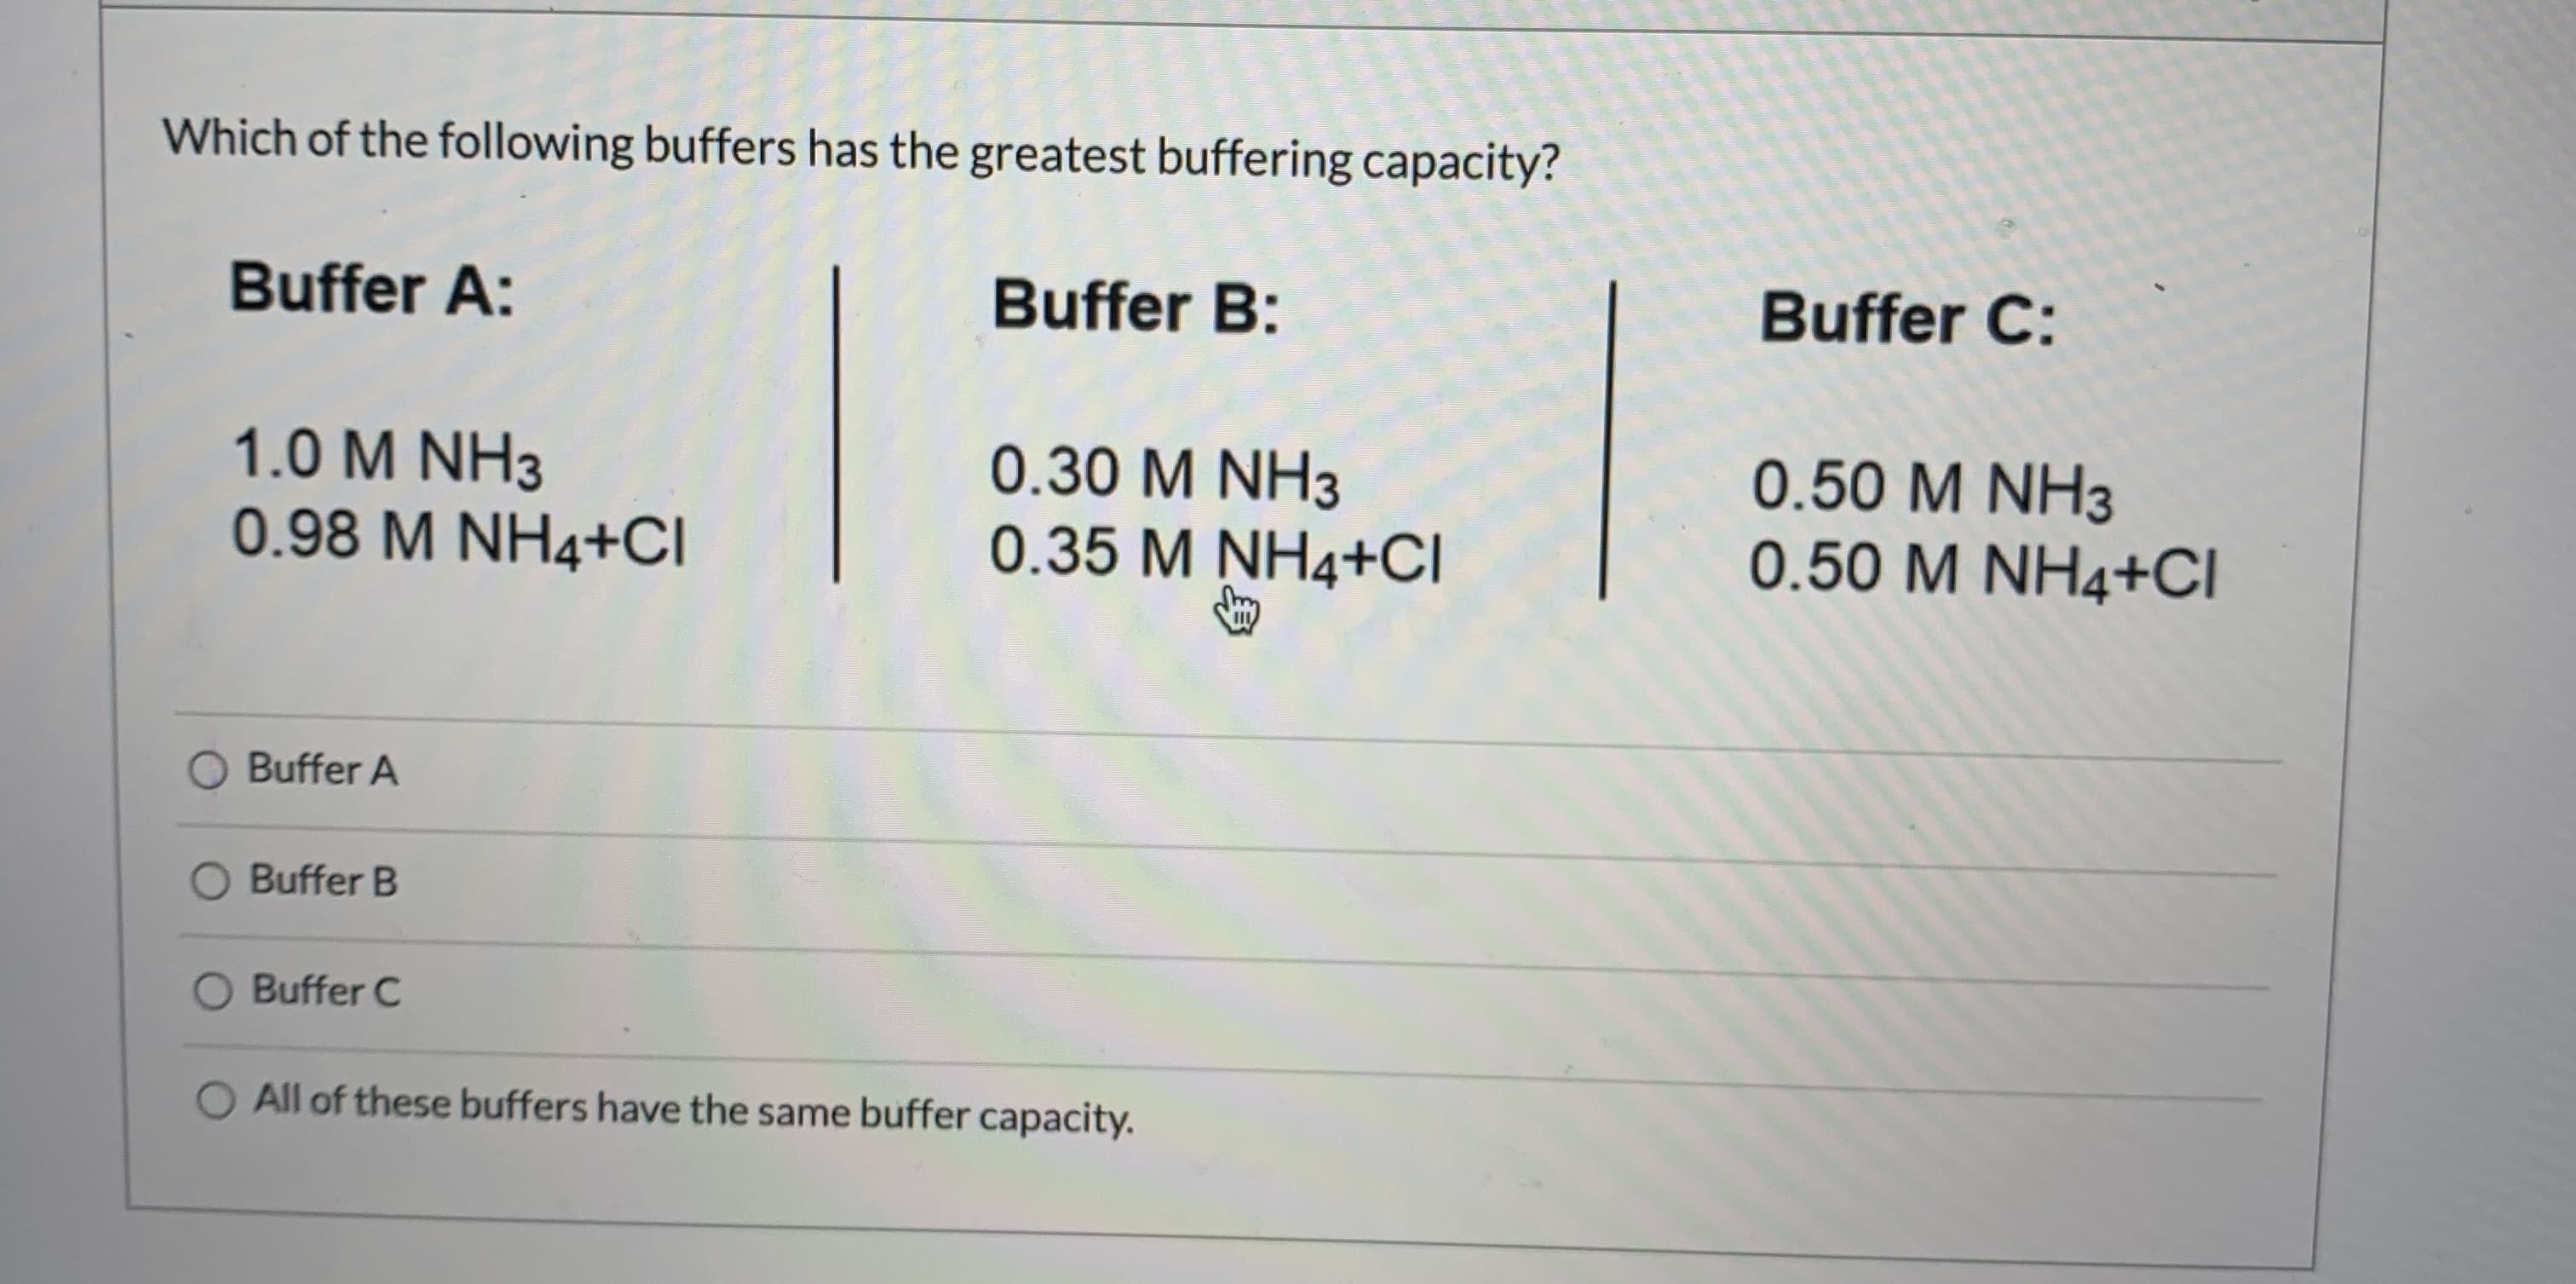 Which of the following buffers has the greatest buffering capacity?
Buffer A:
Buffer B:
Buffer C:
1.0 M NH3
0.98 M NH4+CI
0.30 M NH3
0.35 M NH4+CI
0.50 M NH3
0.50 M NH4+CI
Buffer A
O Buffer B
Buffer C
All of these buffers have the same buffer capacity.
